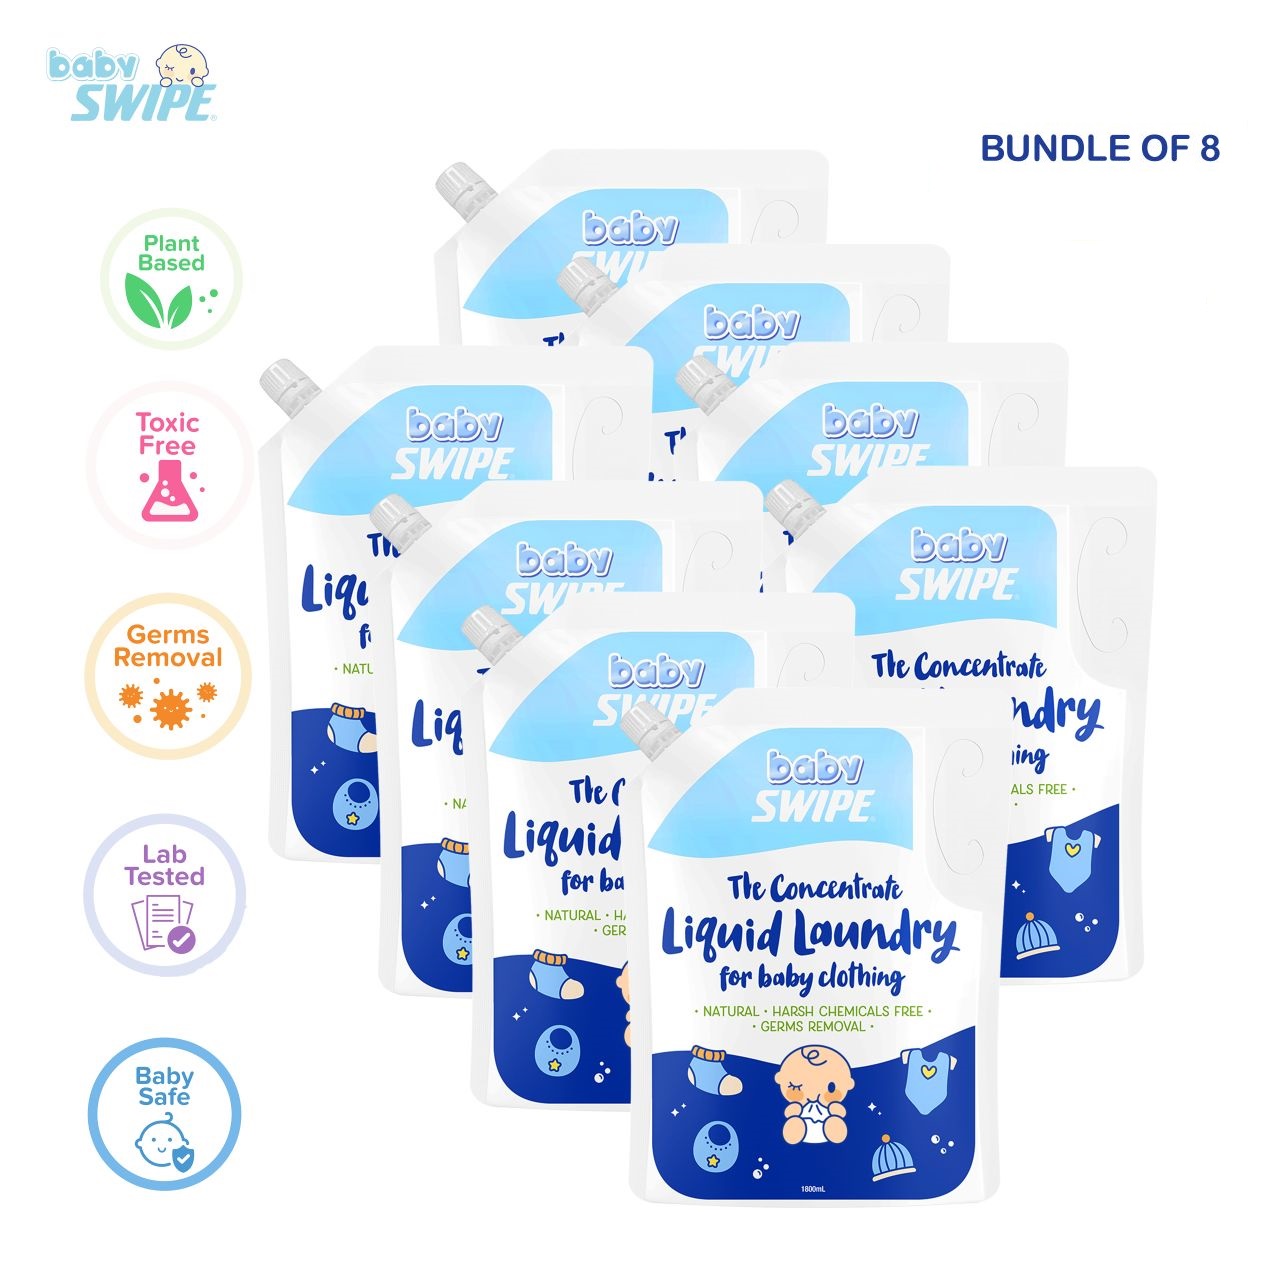 [Carton Deals] babySWIPE Concentrate Liquid Laundry for Baby Clothing 1.8L Pouch Pack (Bundle of 8)